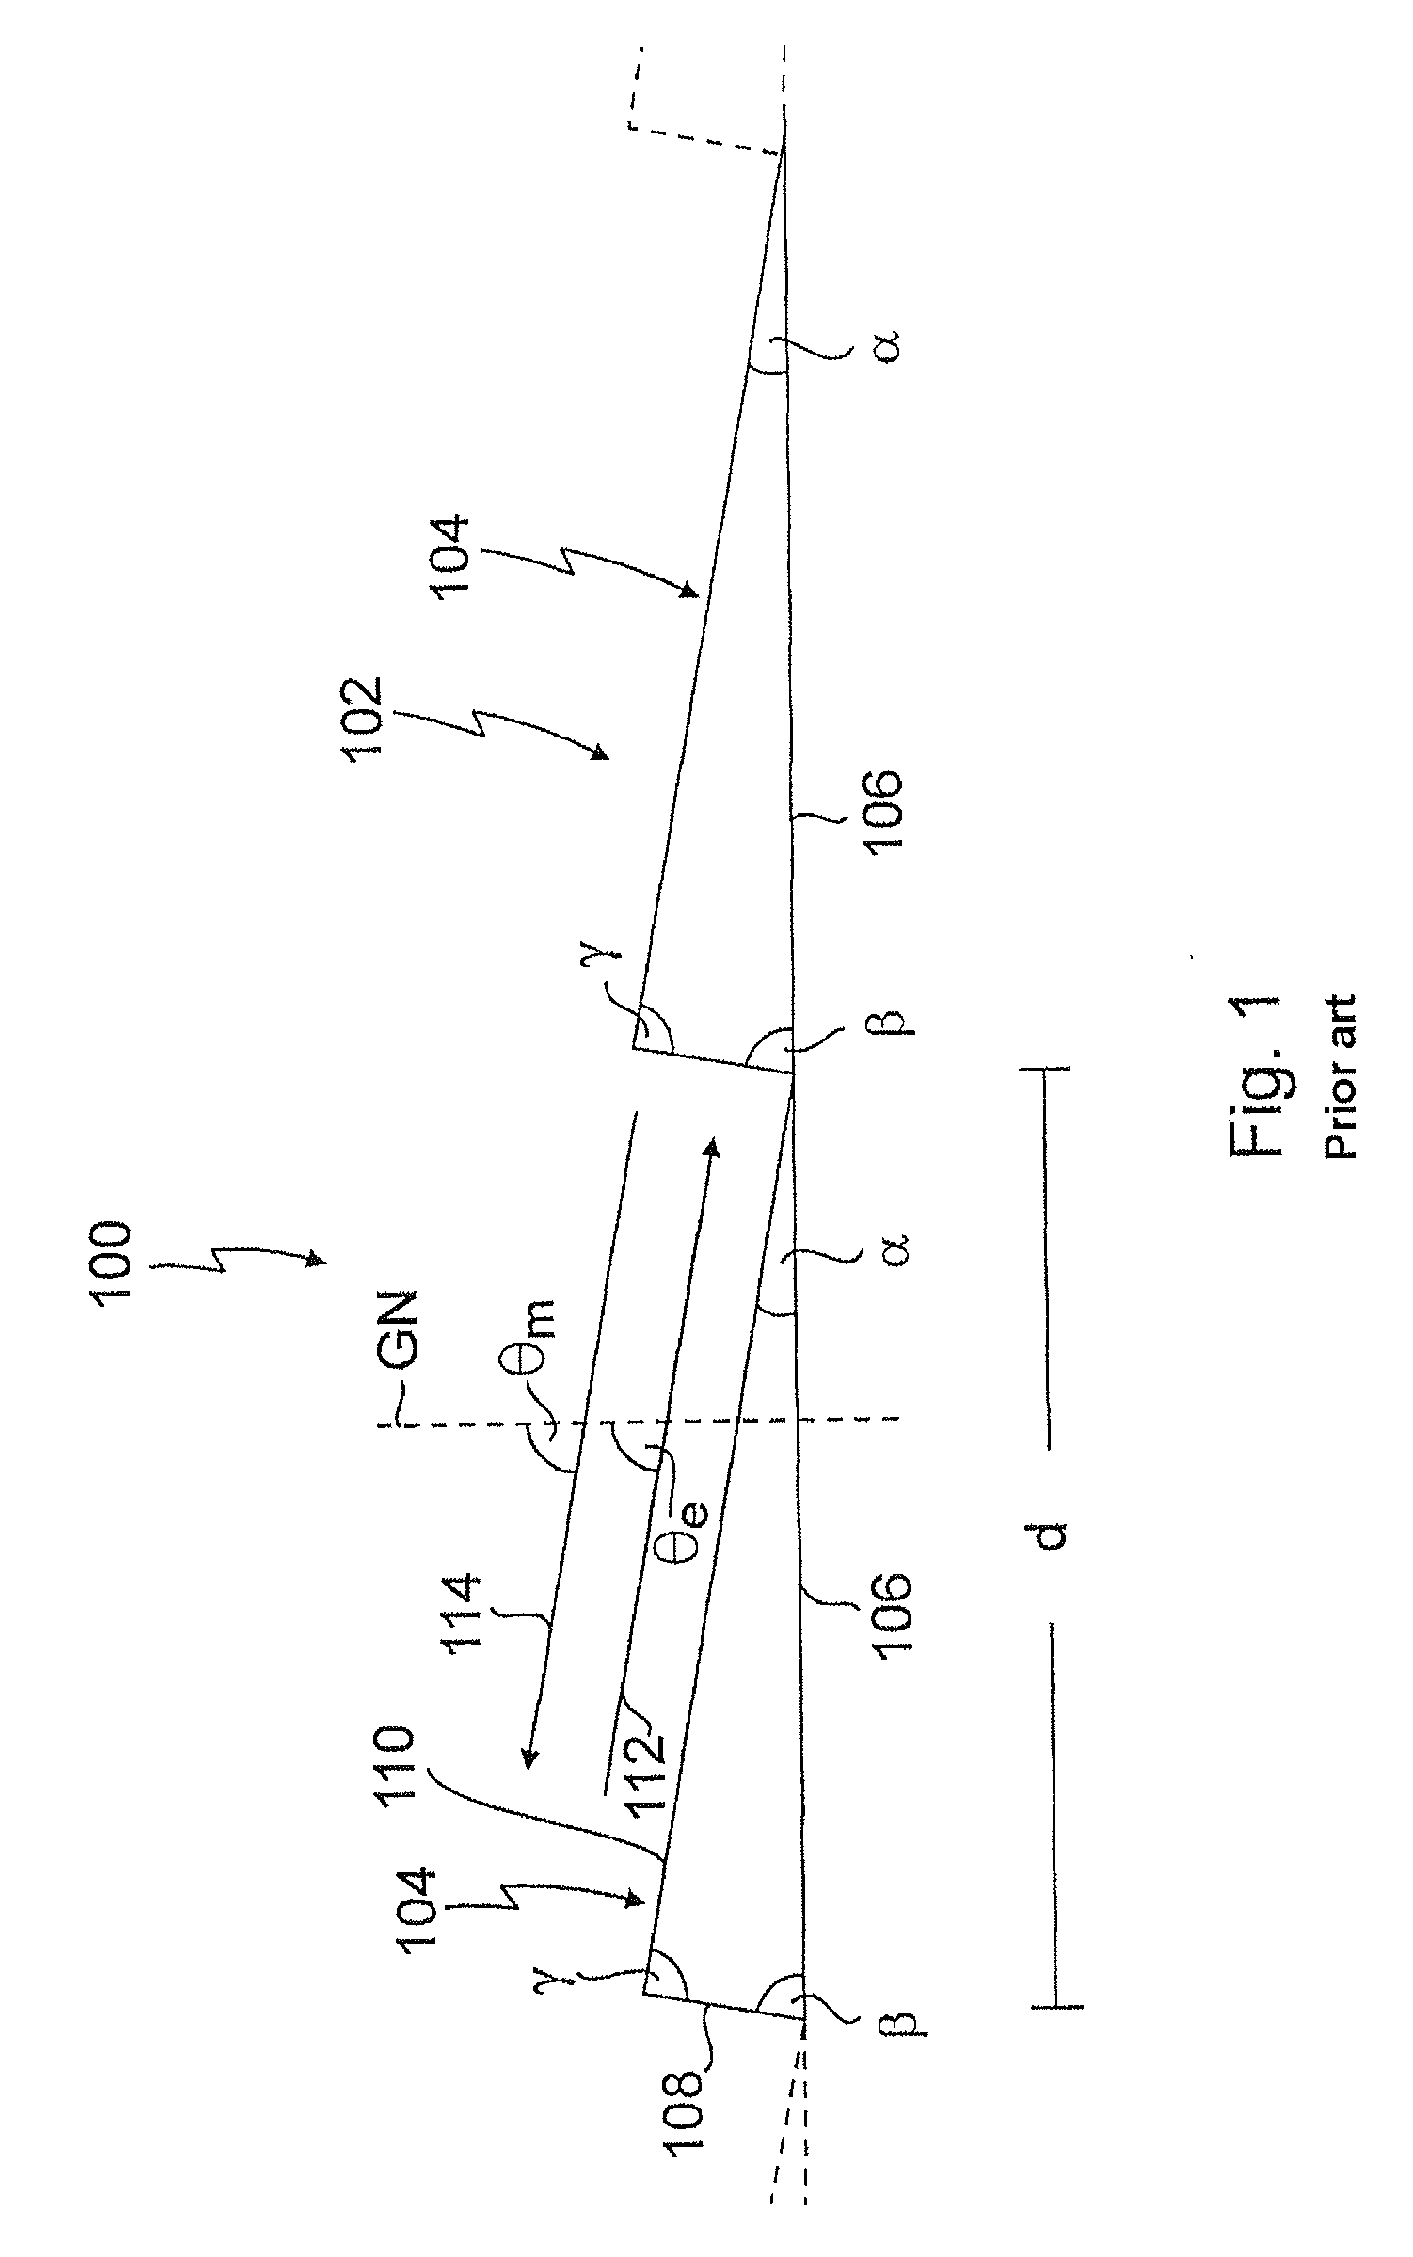 Optical arrangement, method of use, and method for determining a diffraction grating